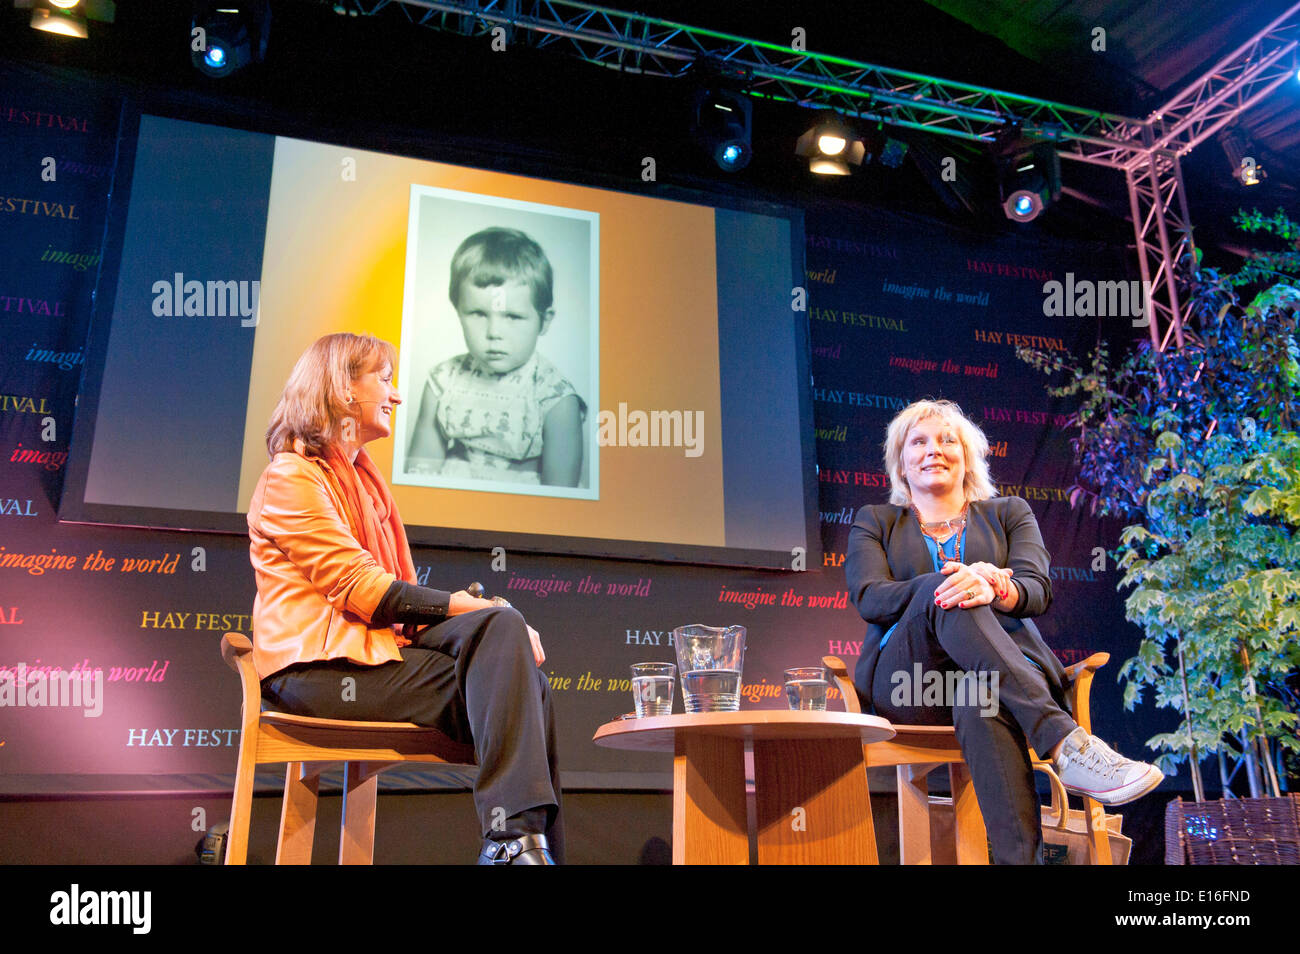 Hay-on-Wye, Powys, UK. 24th May 2014. Jennifer Saunders (R), English comedian, screenwriter and actress, talks to Francine Stock at the Hay Festival. The Hay Festival of Literature and Arts celebrates its 27th year in Wales. Credit:  Graham M. Lawrence/Alamy Live News. Stock Photo